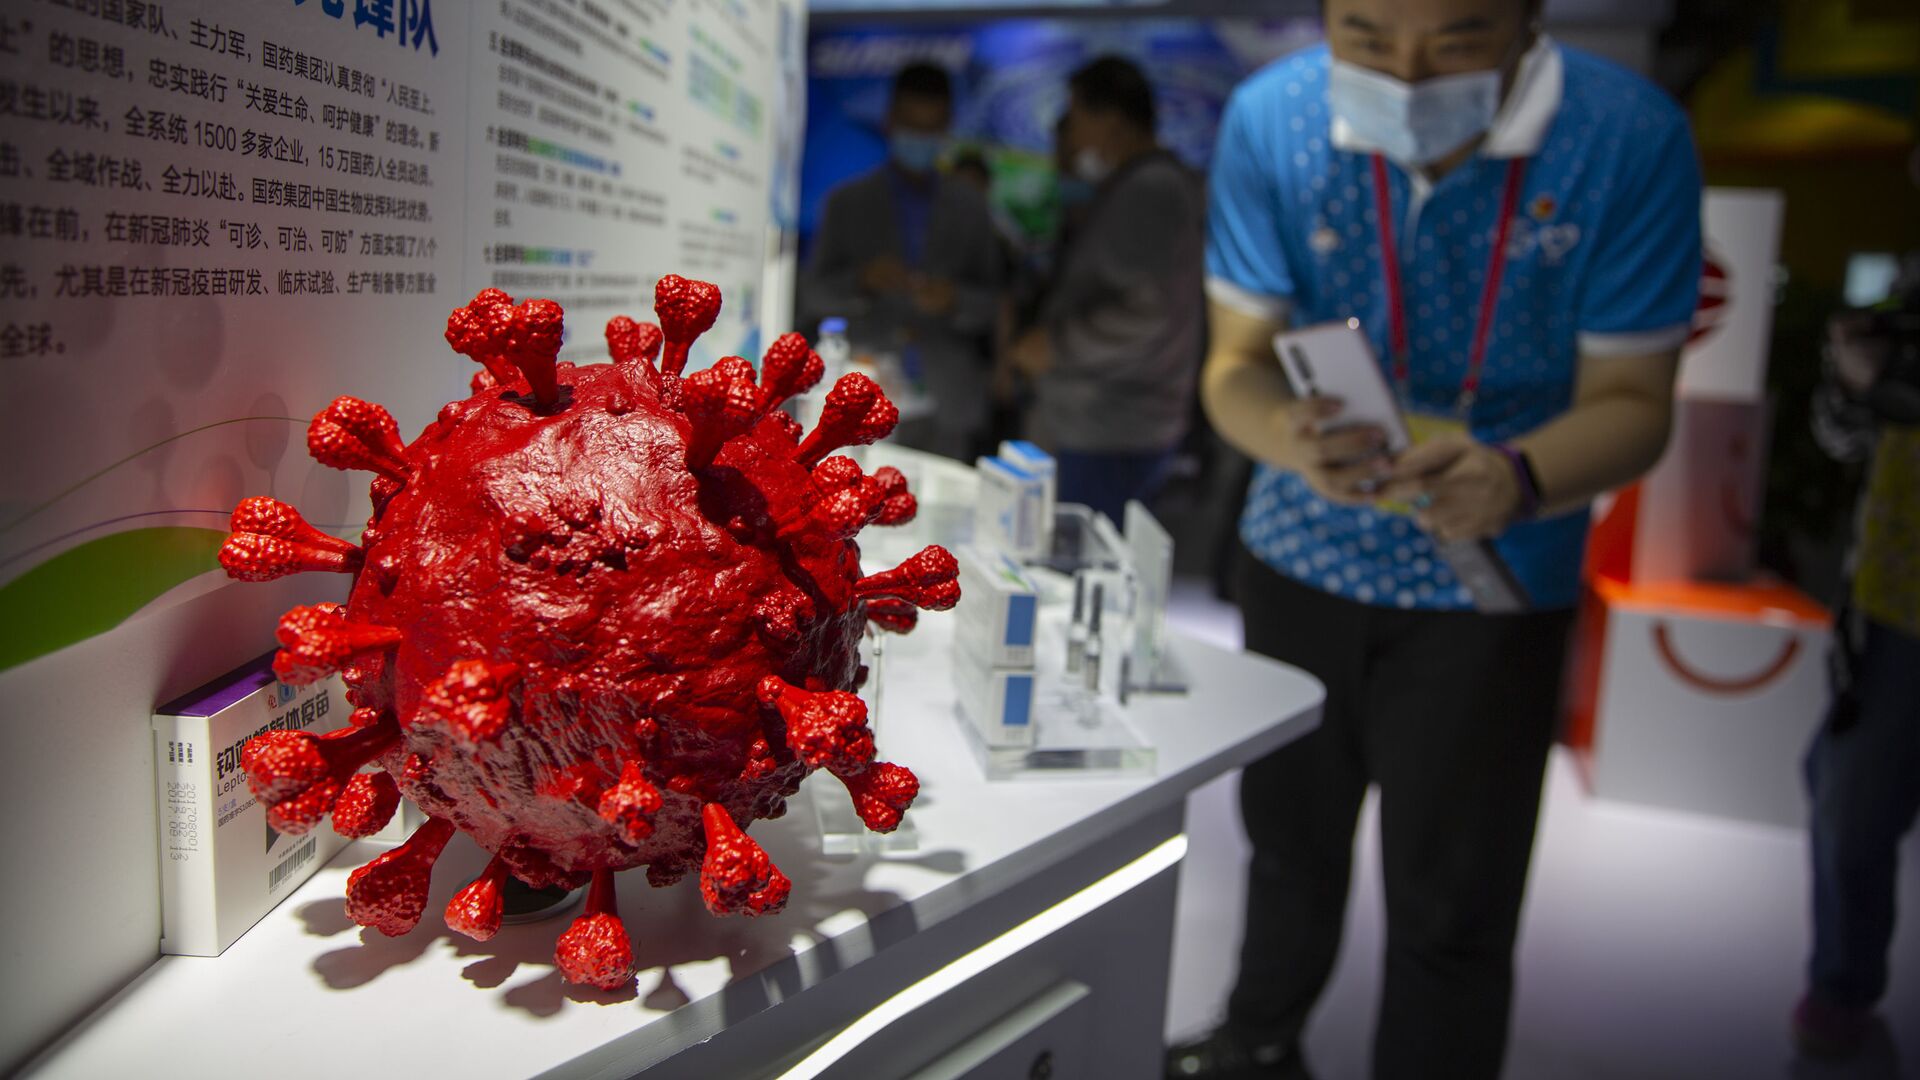 A visitor wearing a face mask takes a photo of a model of a coronavirus and boxes for COVID-19 vaccines at a display by Chinese pharmaceutical firm Sinopharm at the China International Fair for Trade in Services (CIFTIS) in Beijing, Saturday, Sept. 5, 2020. With the COVID-19 pandemic largely under control, China's capital on Saturday kicked off one of the first large-scale public events since the start of the coronavirus outbreak, as tens of thousands of attendees were expected to visit displays from nearly 2,000 Chinese and foreign companies showcasing their products and services. - Sputnik International, 1920, 03.08.2021